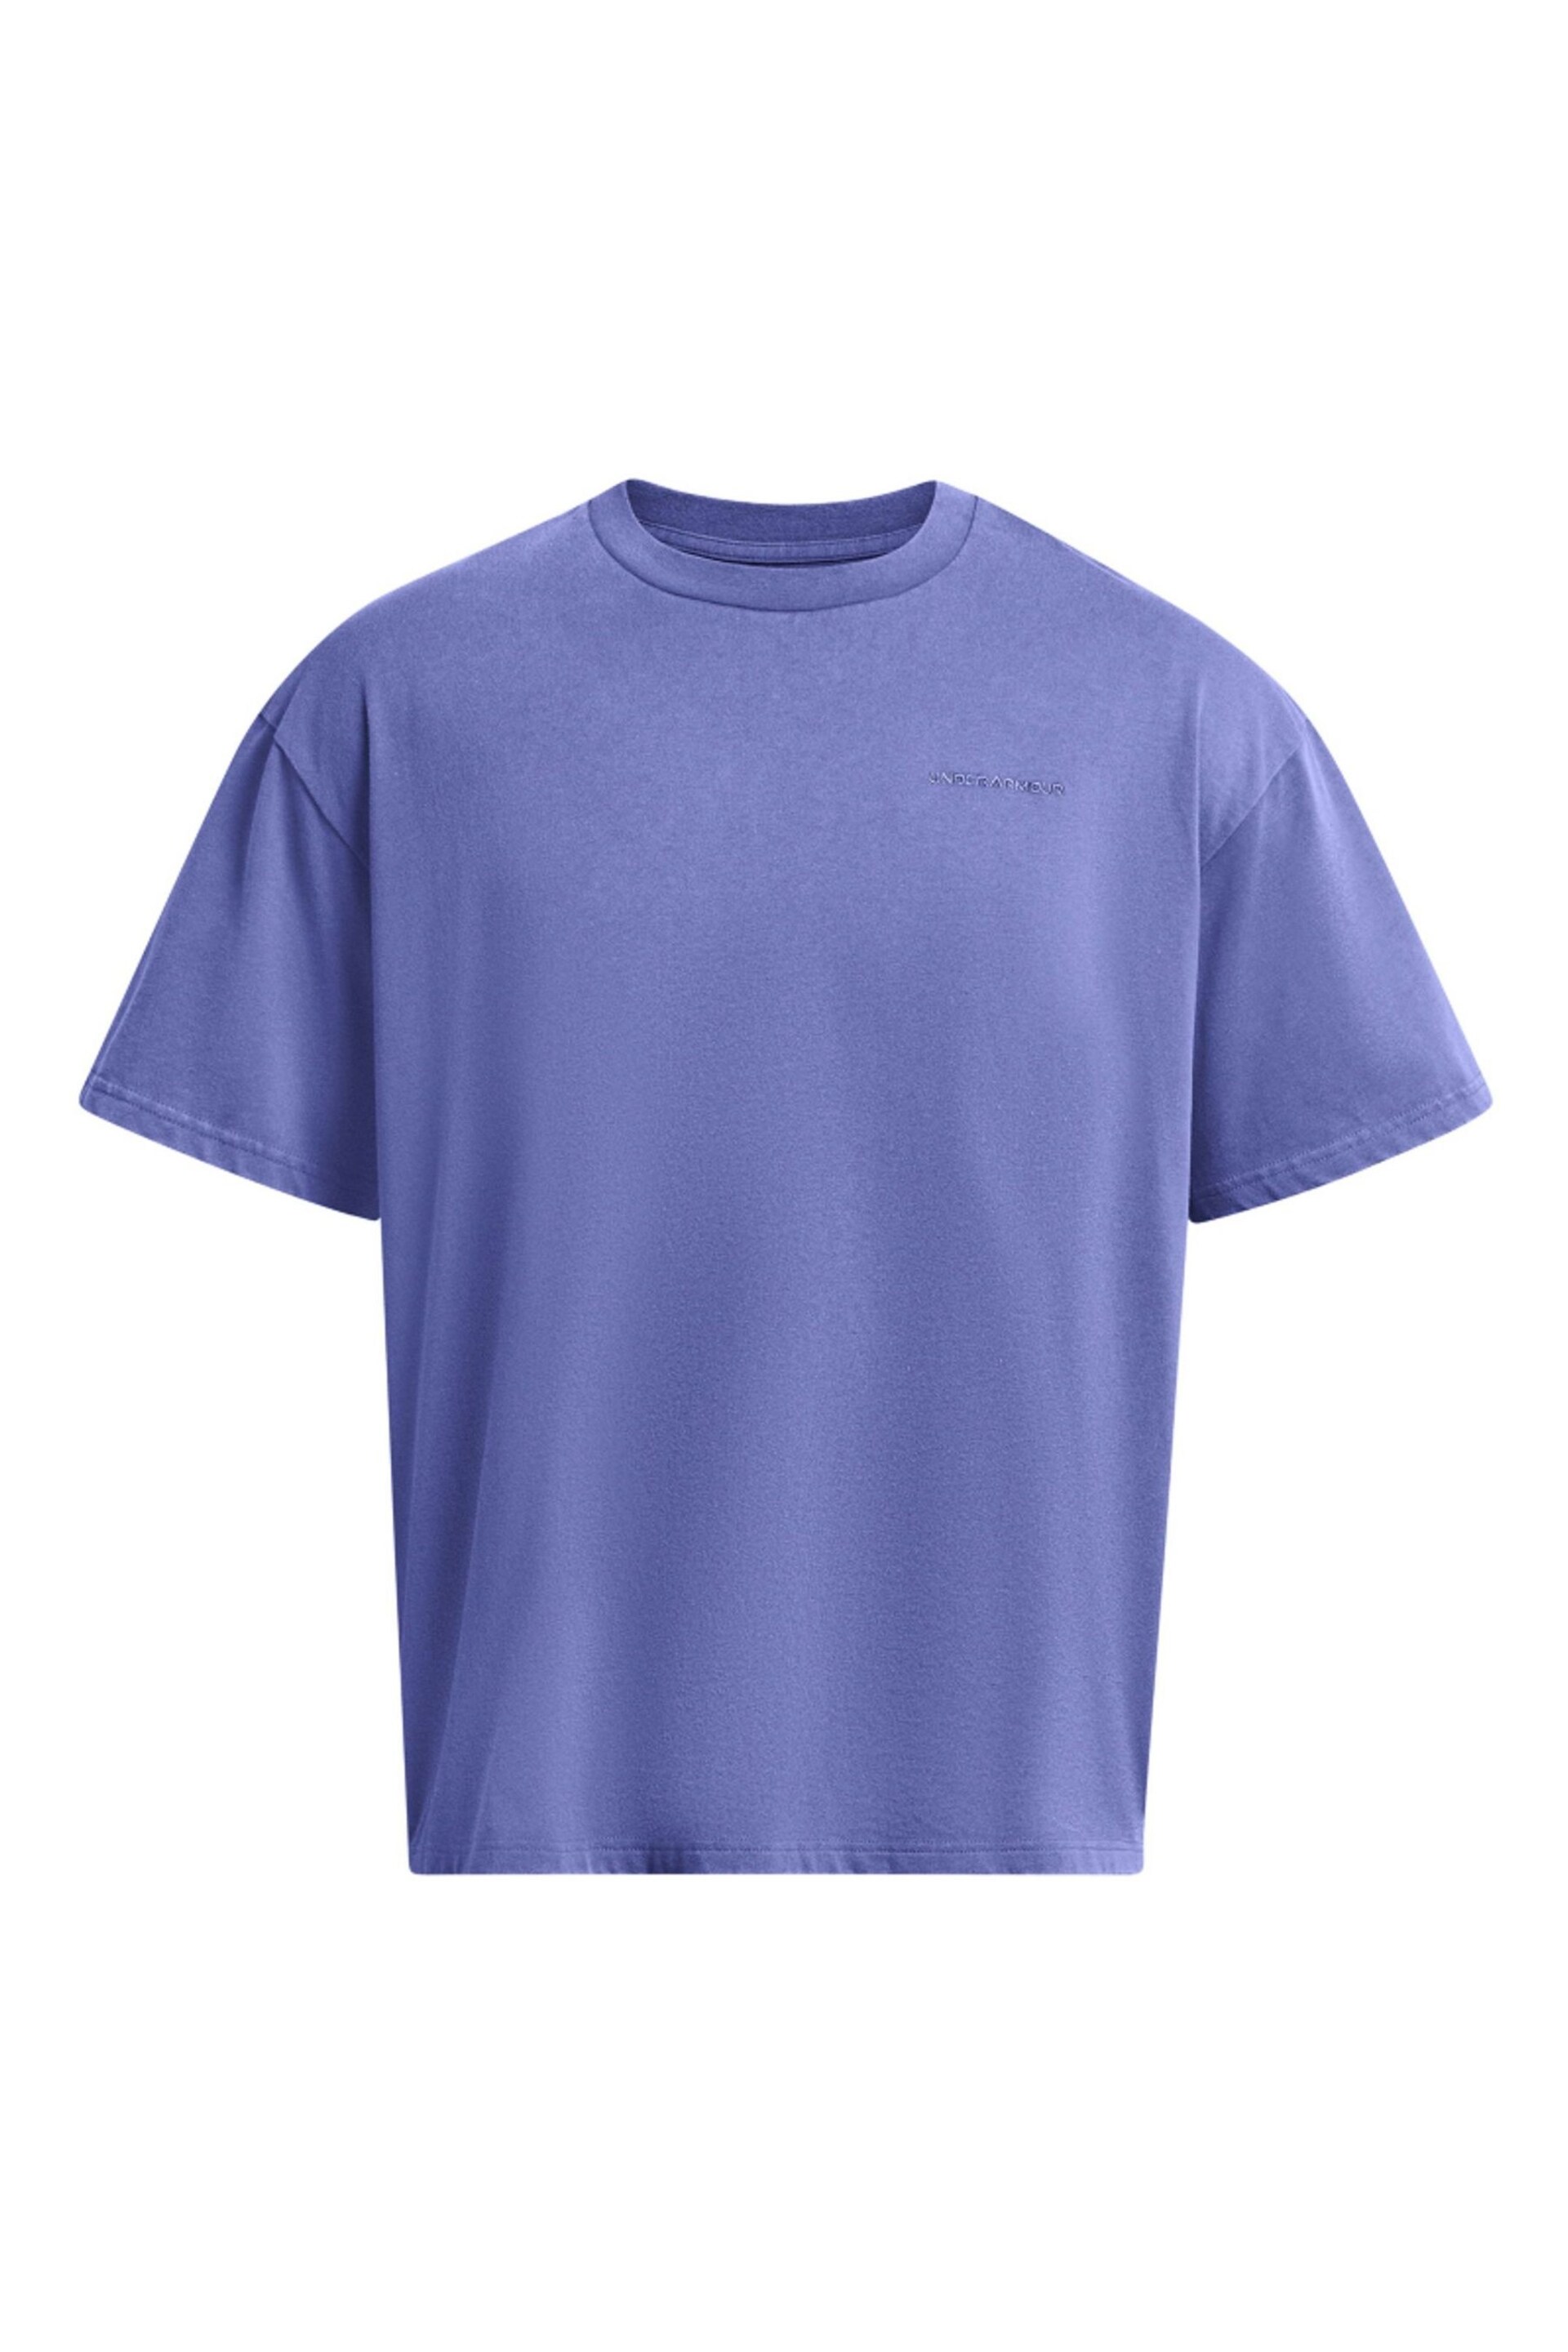 Under Armour Blue T-Shirt - Image 4 of 5